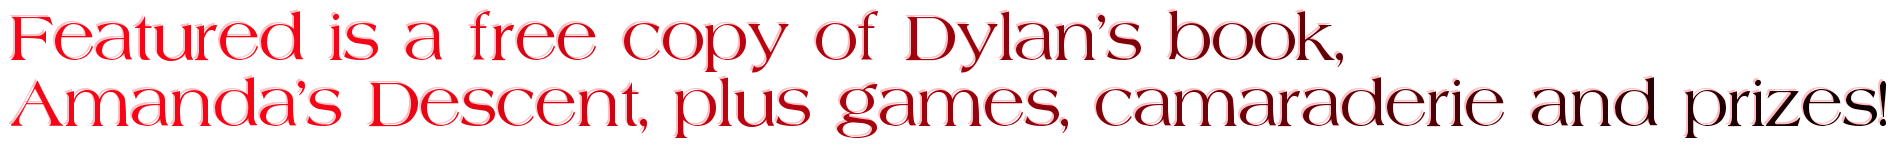 Featured is a free copy of Dylan's book,  Amanda's Descent, plus games, camaraderie and prizes!